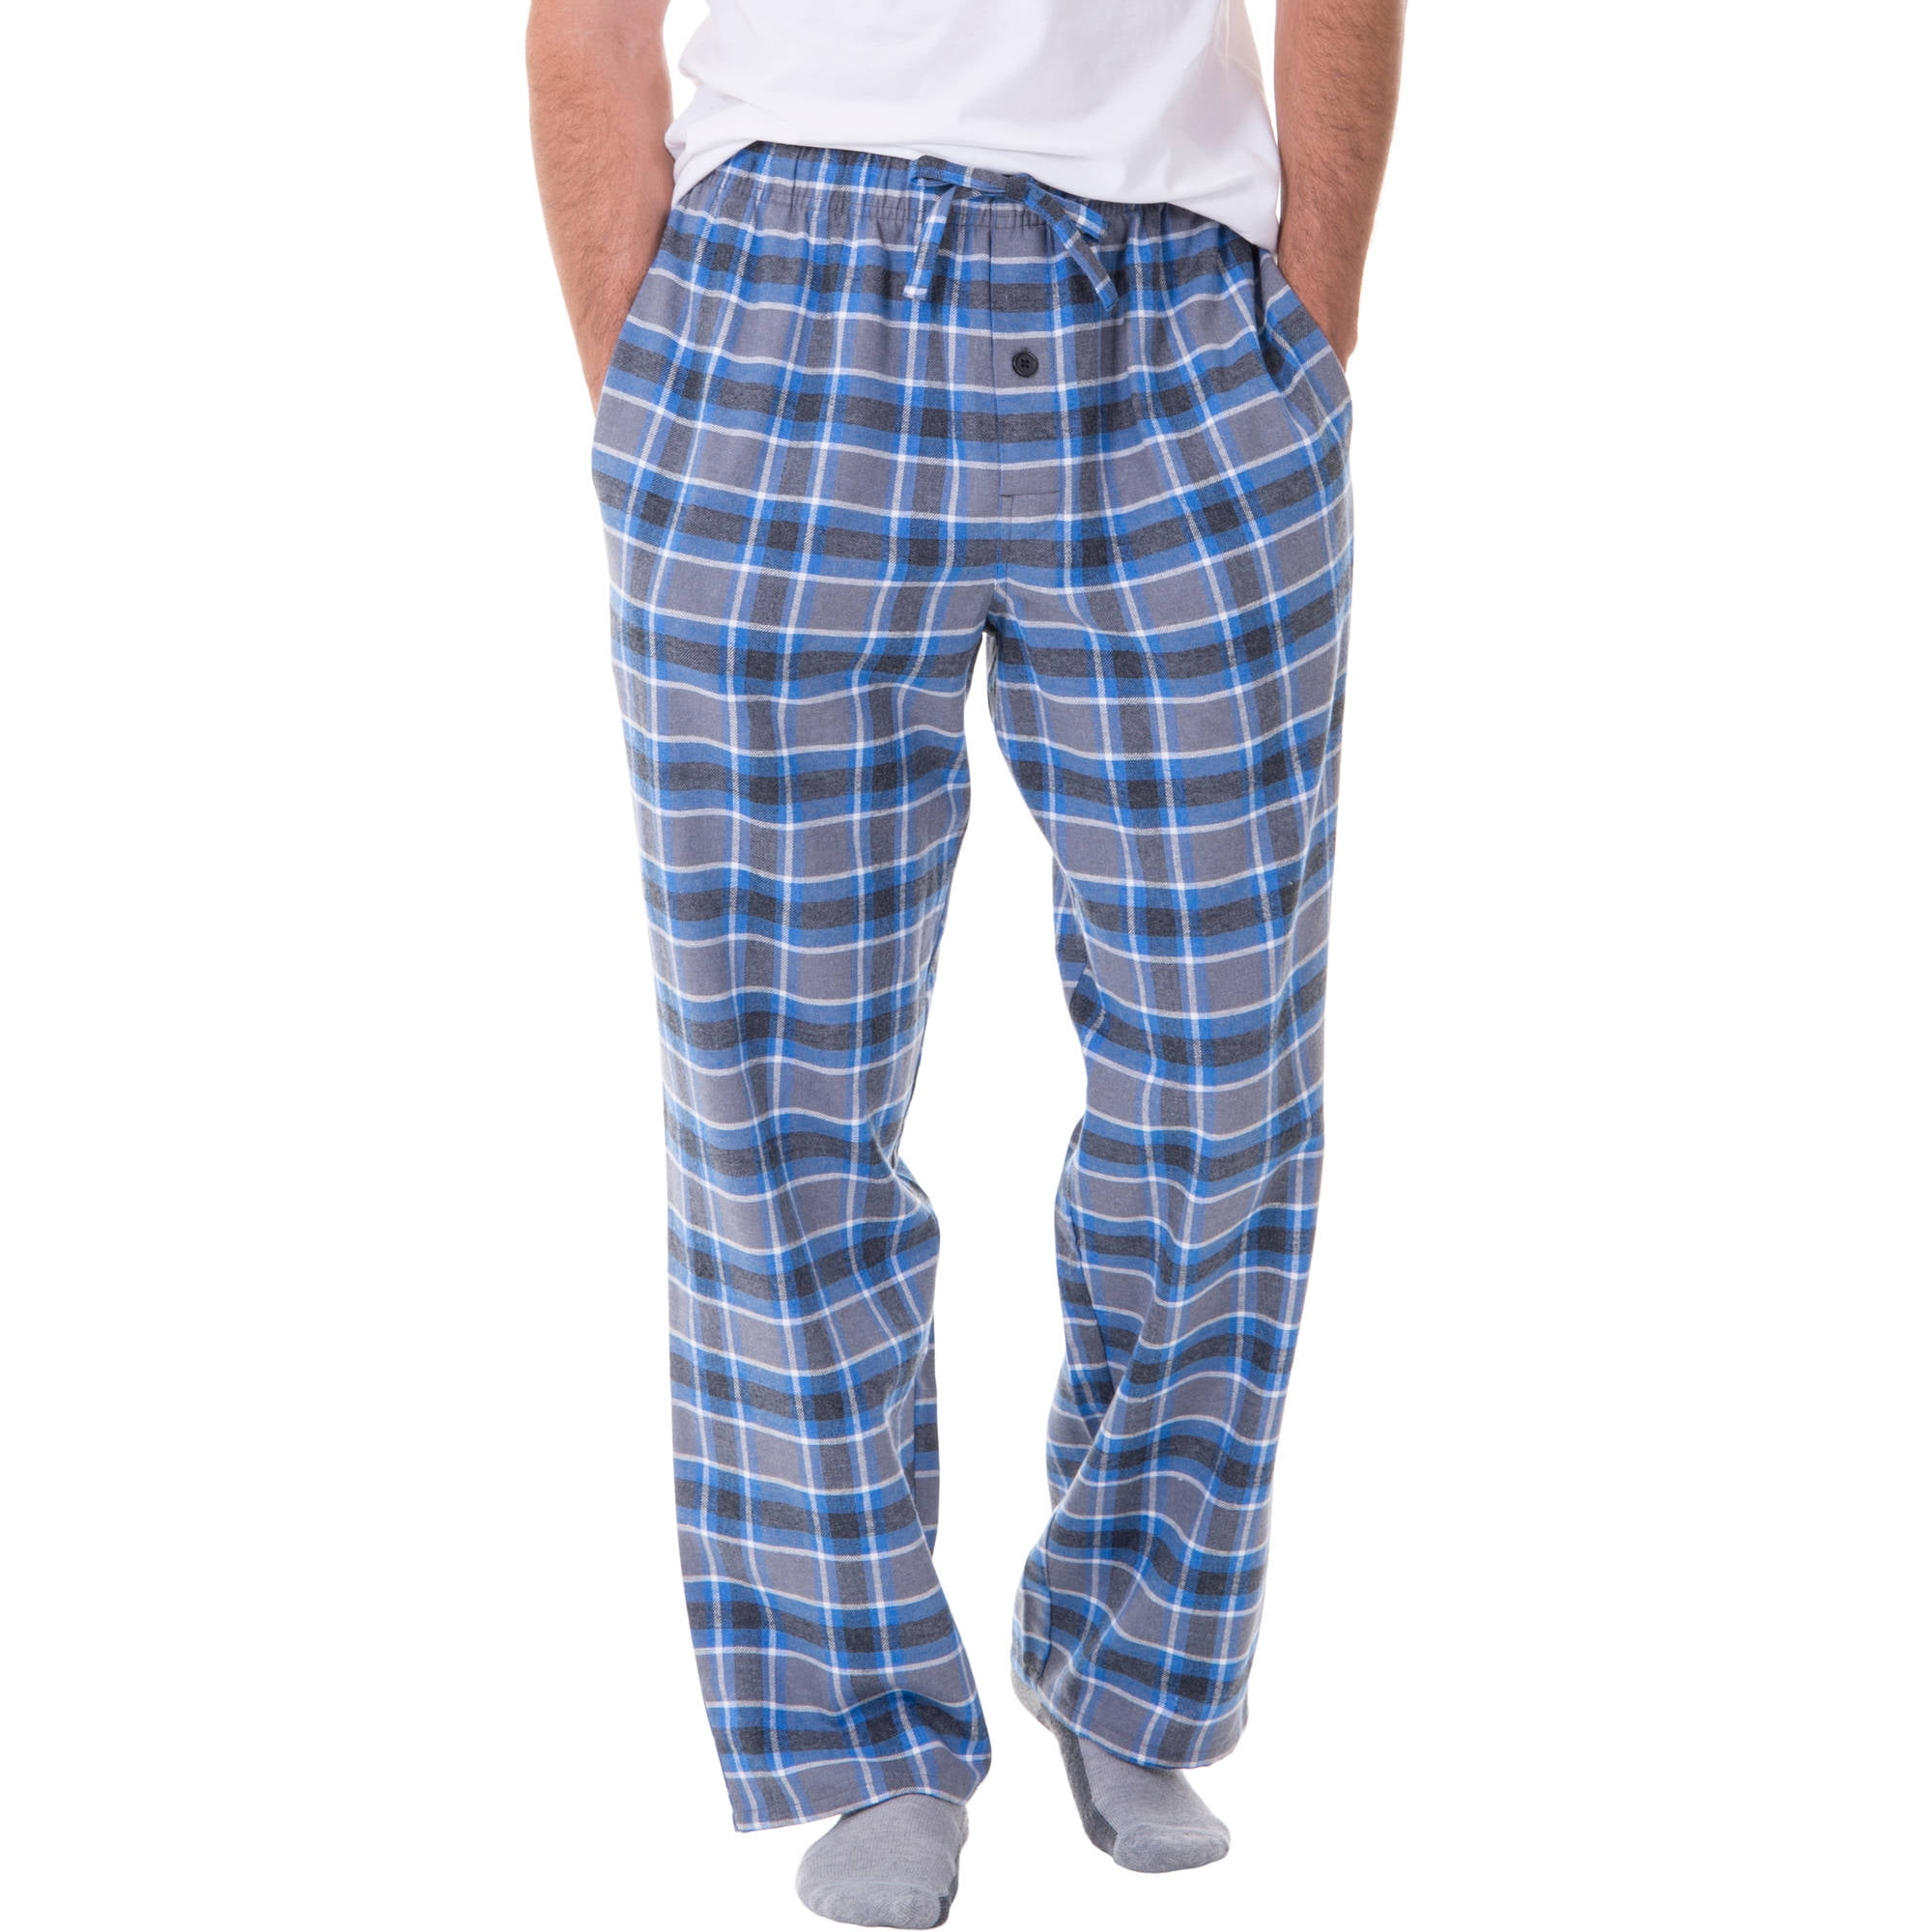 Men's Fruit of the Loom Blue Plaid Pajama Pants in Sizes Large XL & 2XL 